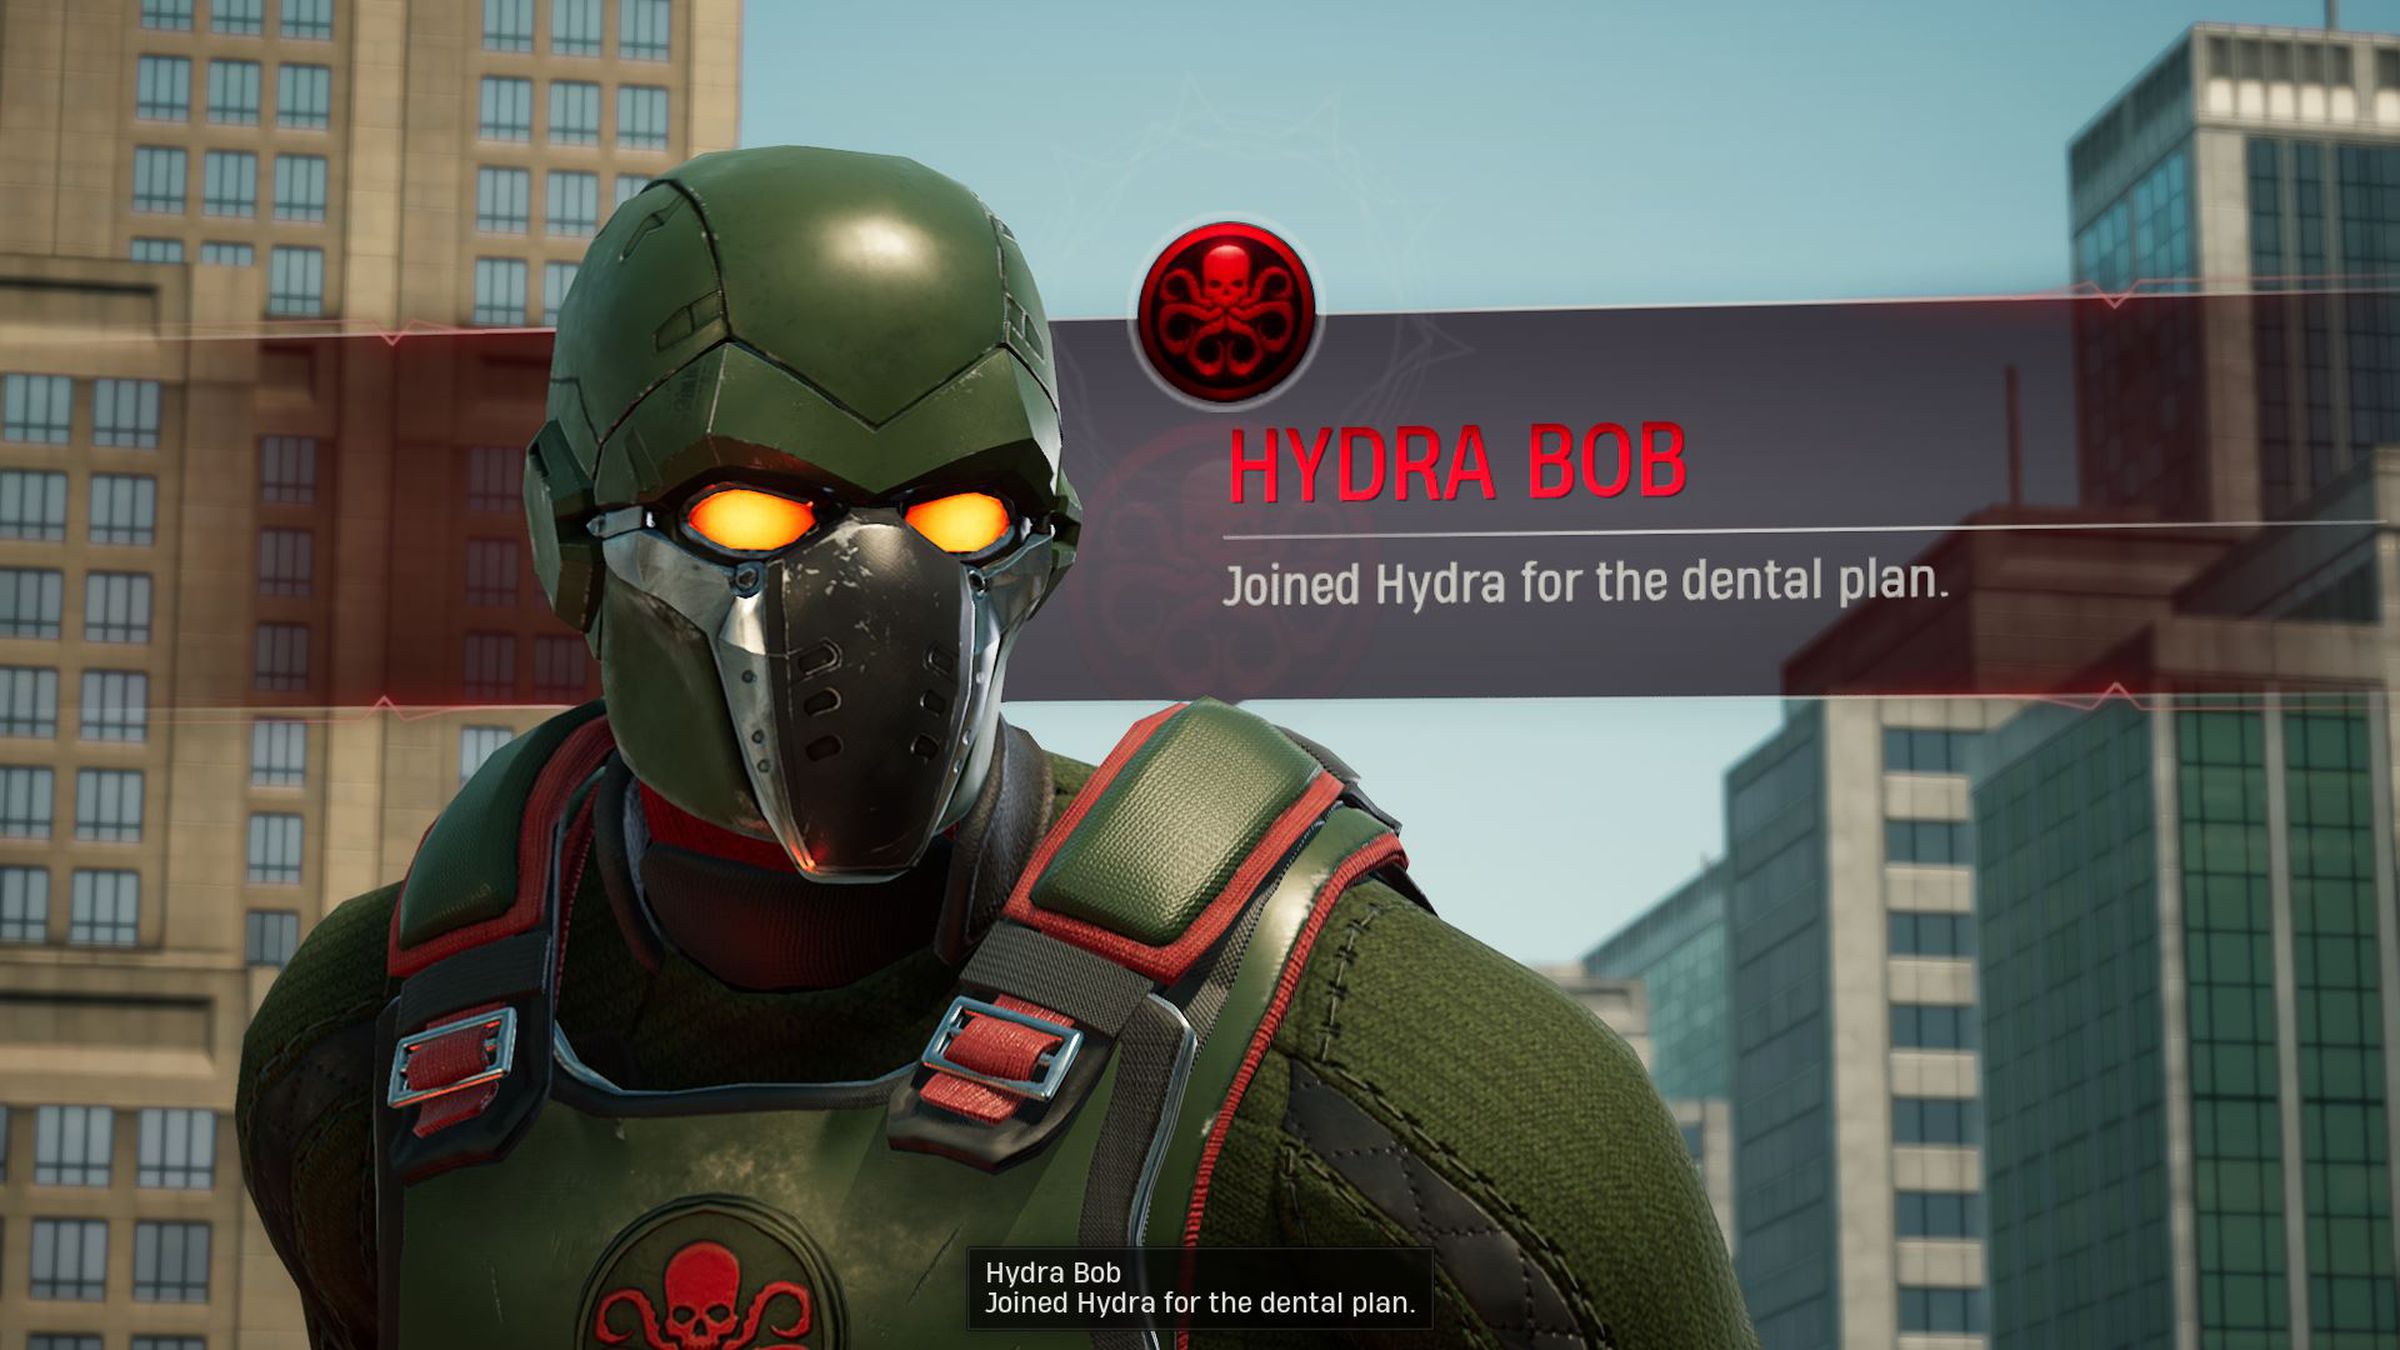 Screenshot from Marvel’s Midnight Suns featuring a minion character named “Hydra Bob” with words beside his body saying “Hydra Bob, Joined Hydra for the dental plan.”